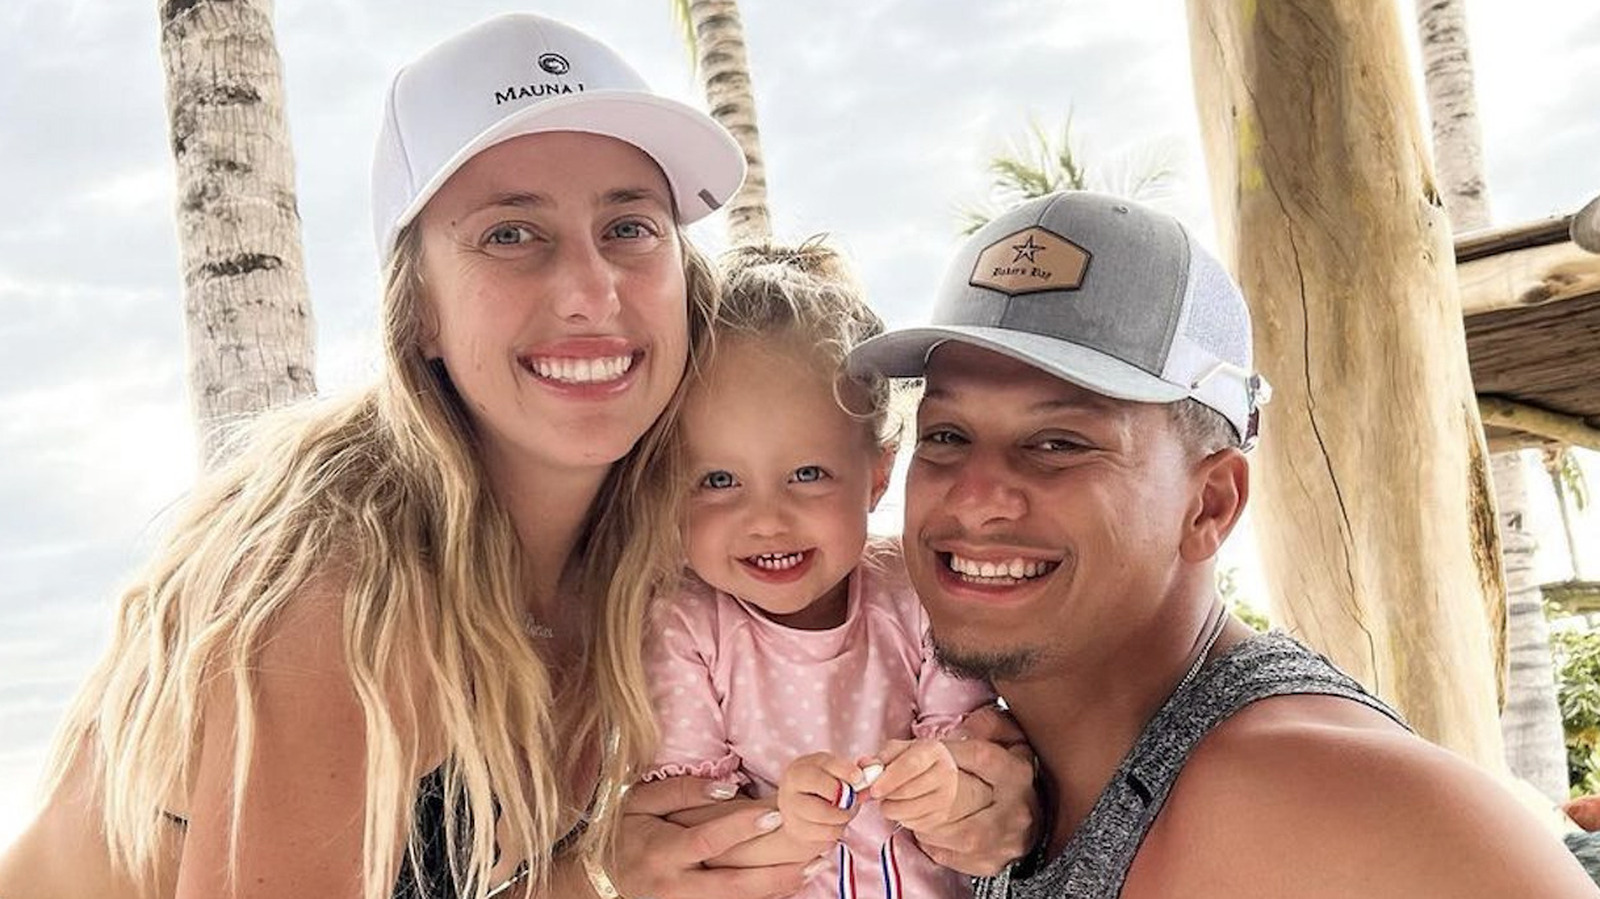 Patrick Mahomes' wife Brittany shares adorable picture of daughter Sterling  Skye from family's day out